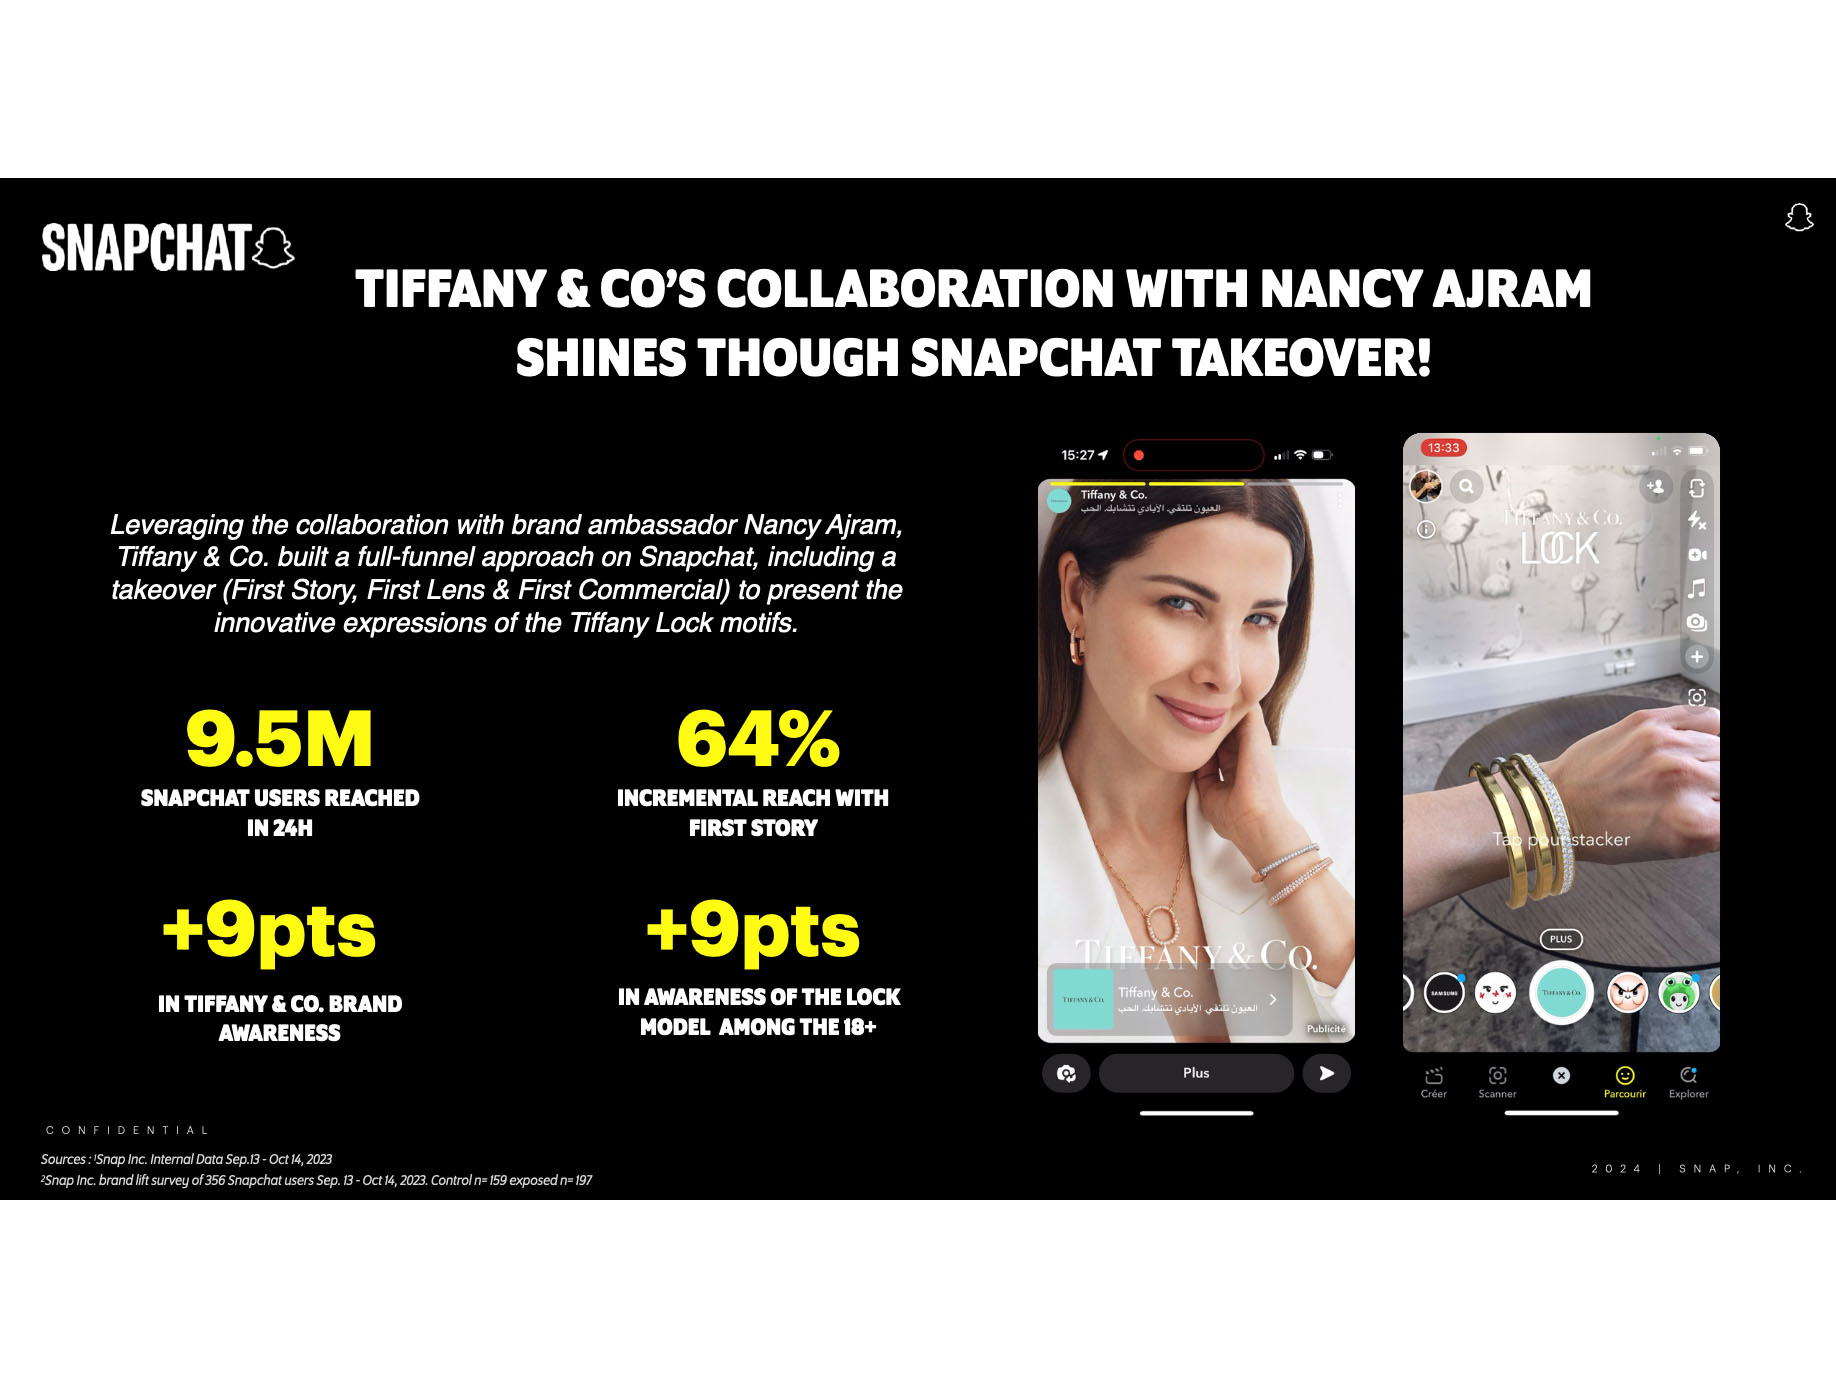 Tiffany & Co's Snapchat takeover reaches over 9.5 million users within 24 hours